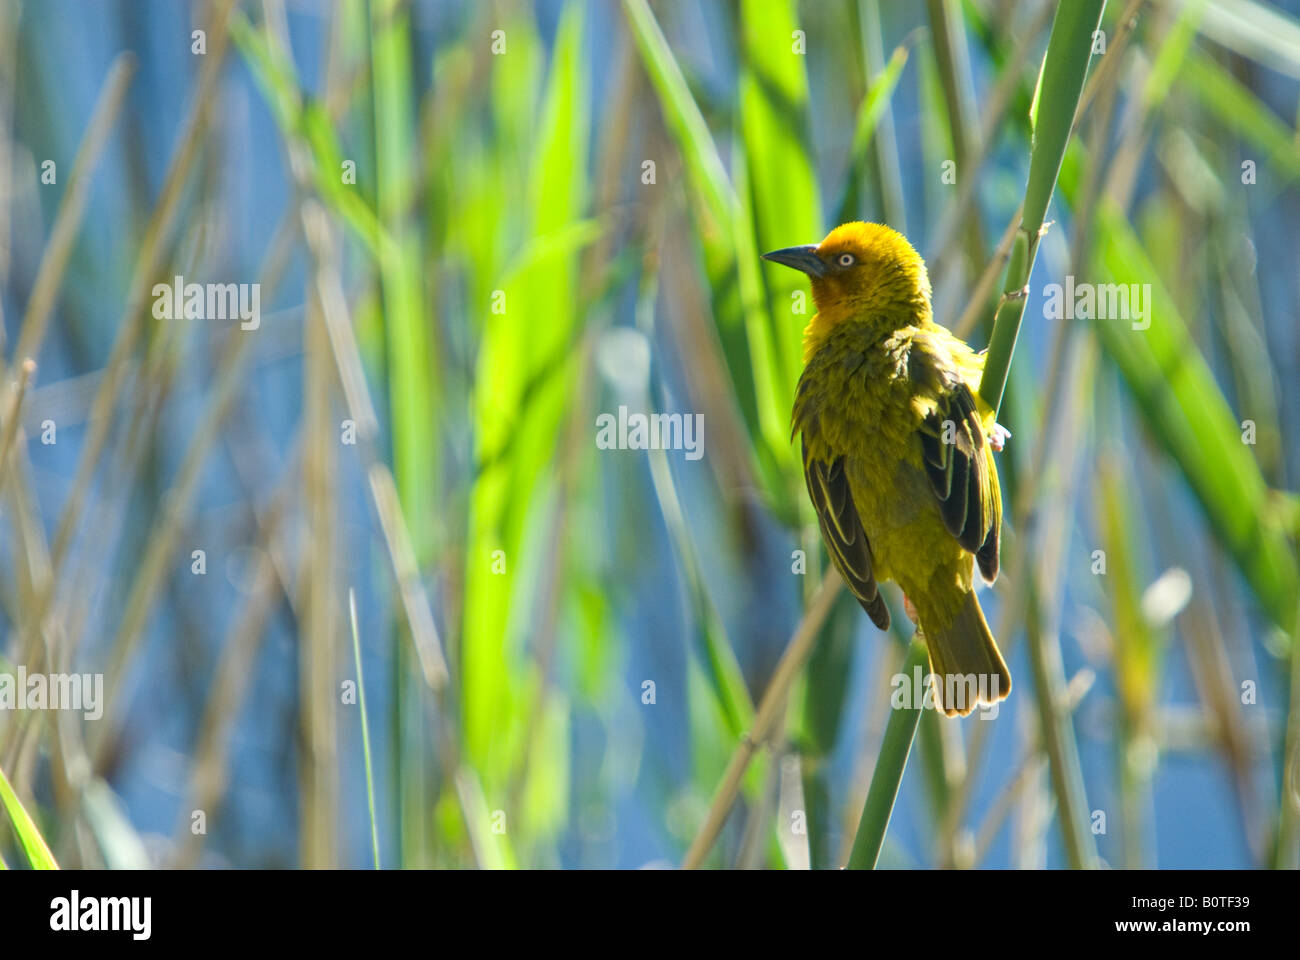 A Cape weaver perched on a reed at the water's edge Stock Photo